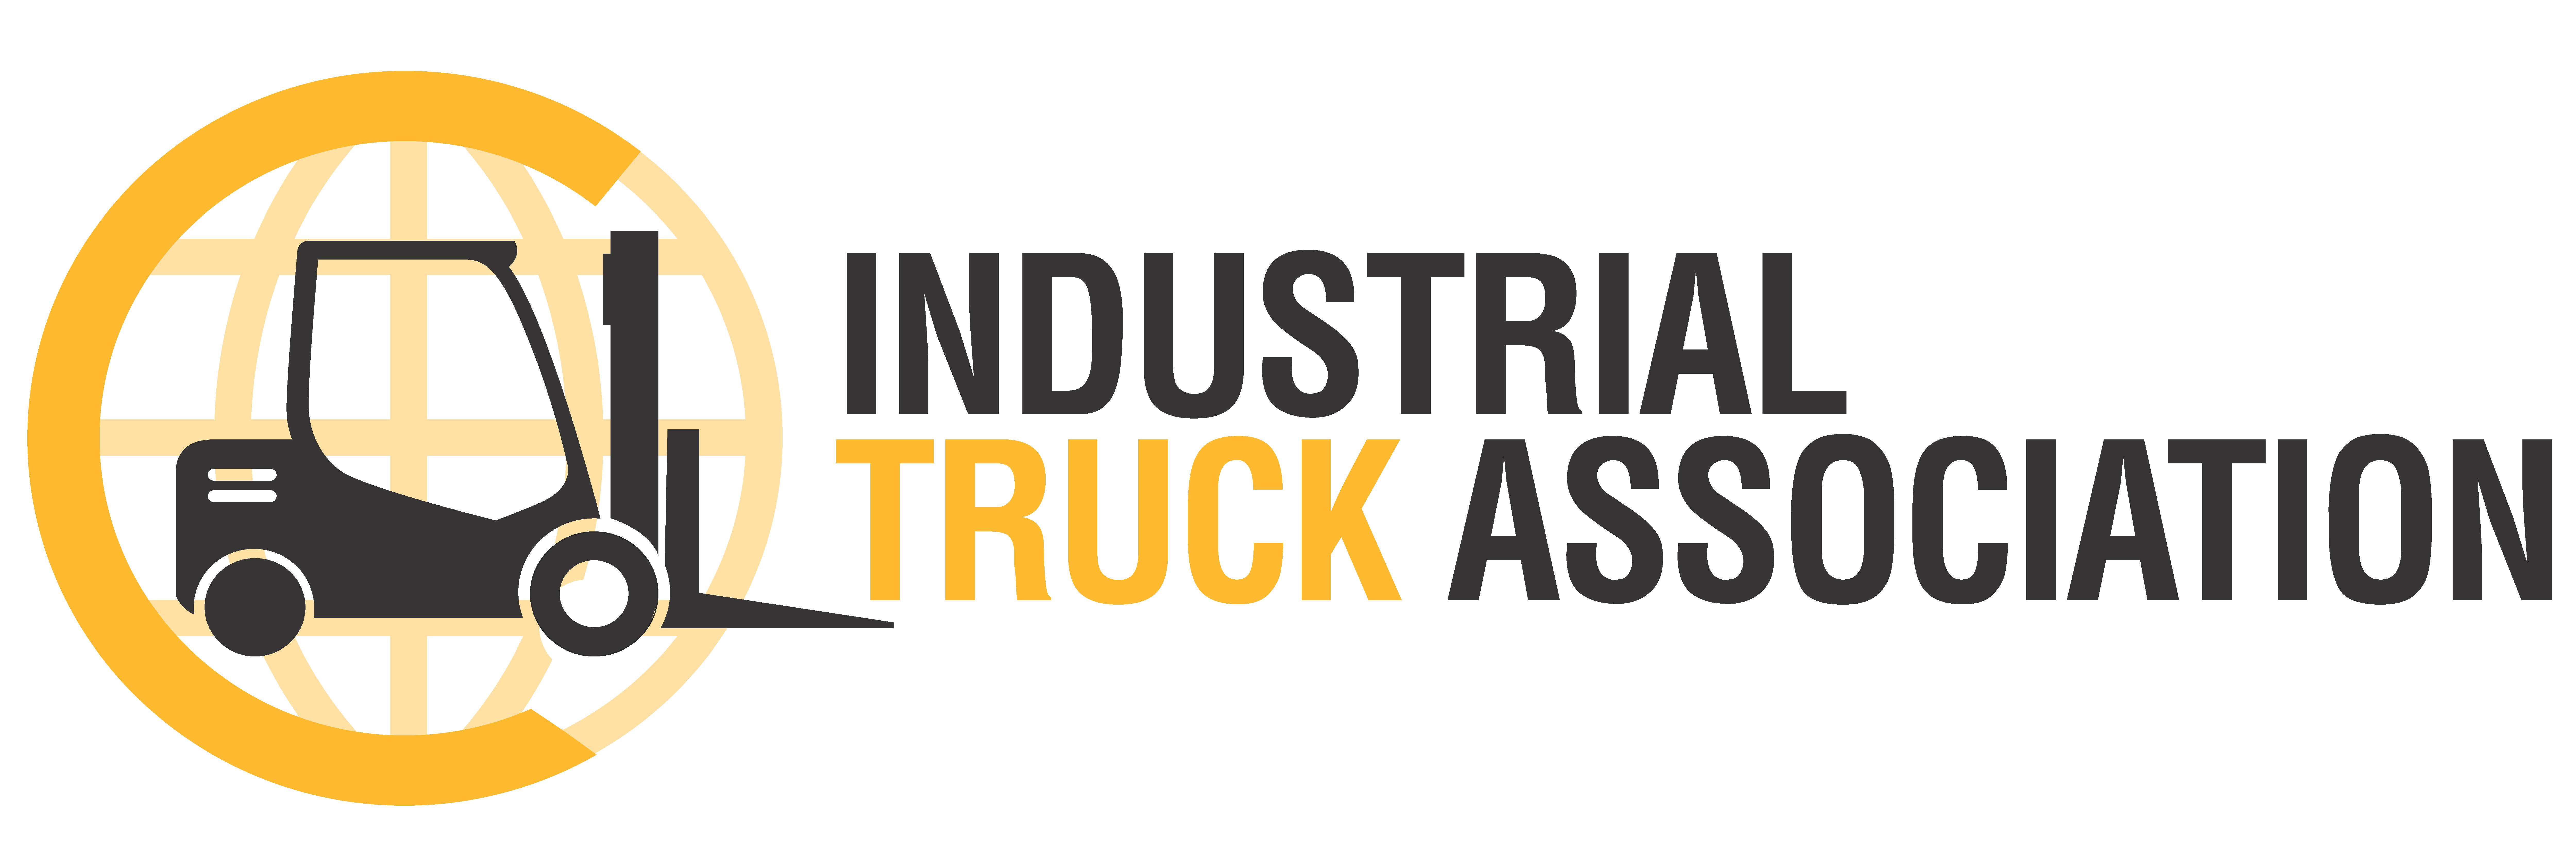 For more than 65 years, ITA has been the leading organization of industrial truck manufacturers and suppliers of component parts and accessories that conduct business in the U.S., Canada and Mexico.